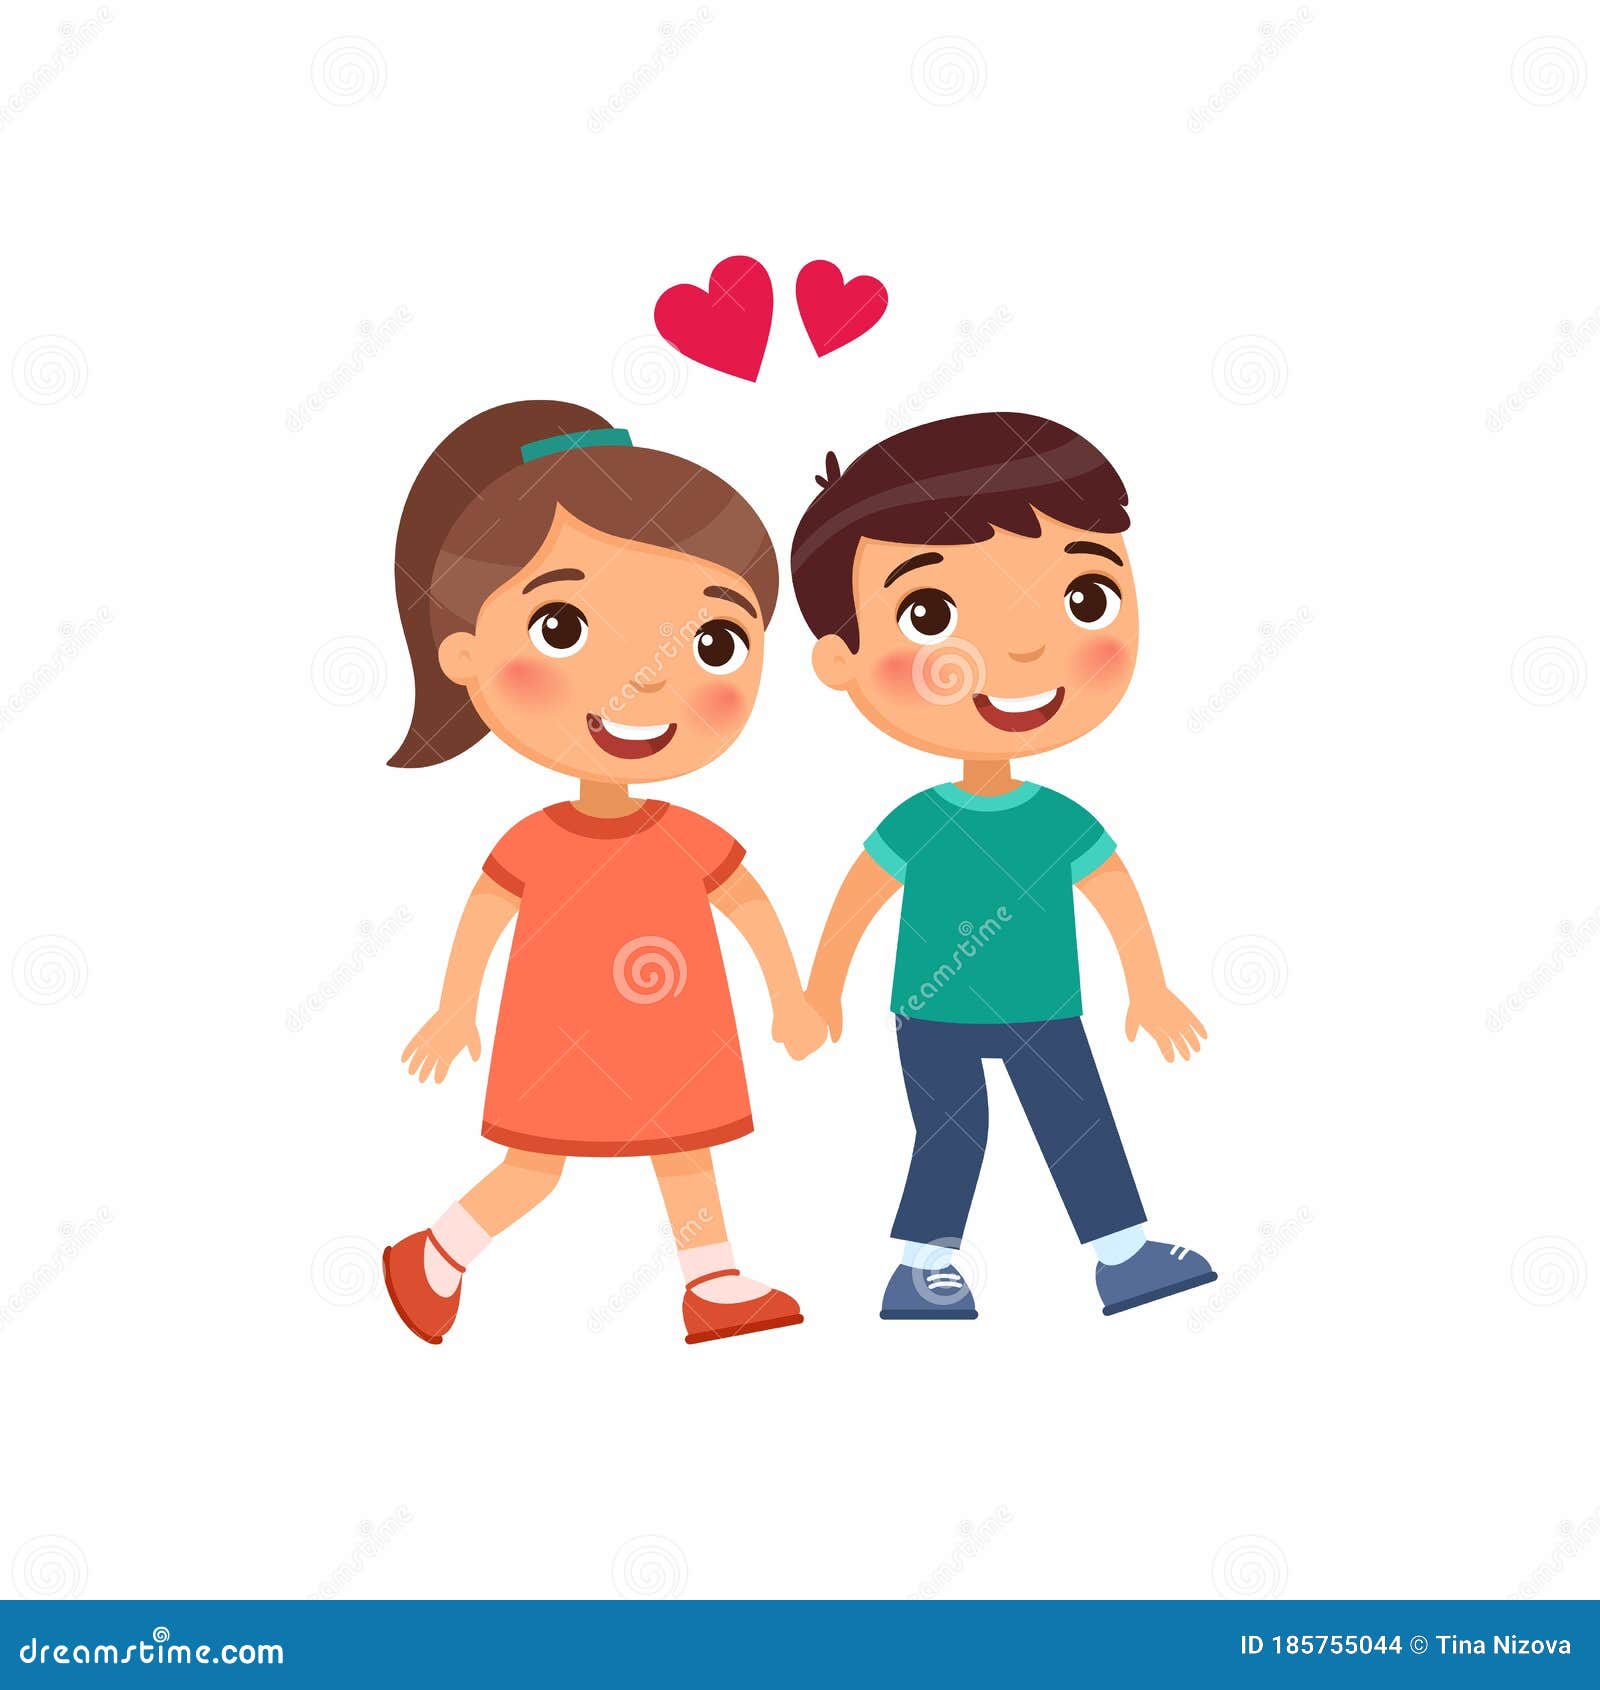 Young Boy And Girl In Love Flat Vector Illustration Cute Boyfriend And Girlfriend Holding Hands Cartoon Characters Stock Vector Illustration Of Couple Children